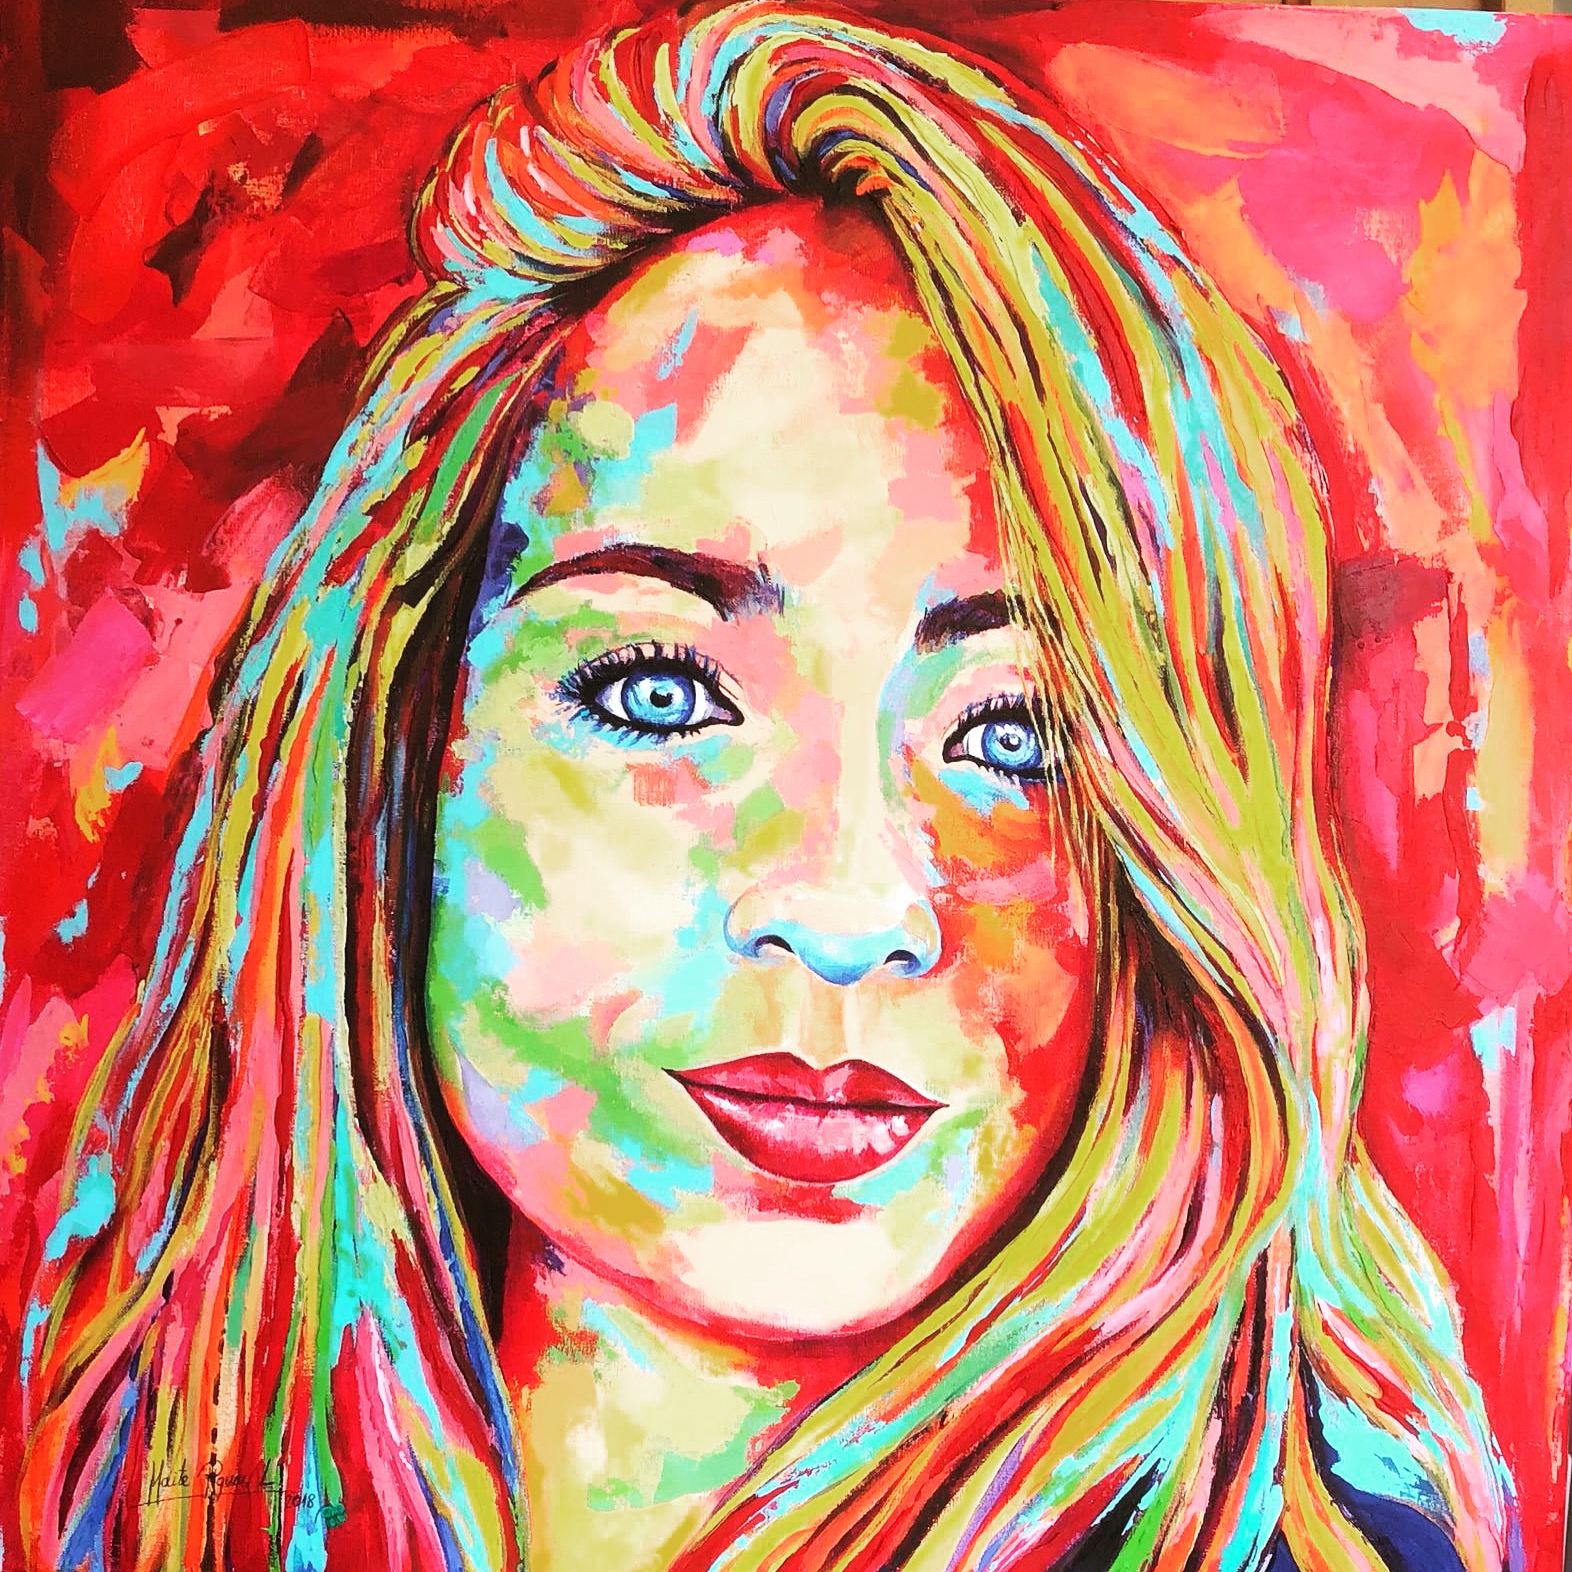 painting, art, Maite Rodriguez, oil painting, modern art, expressionism